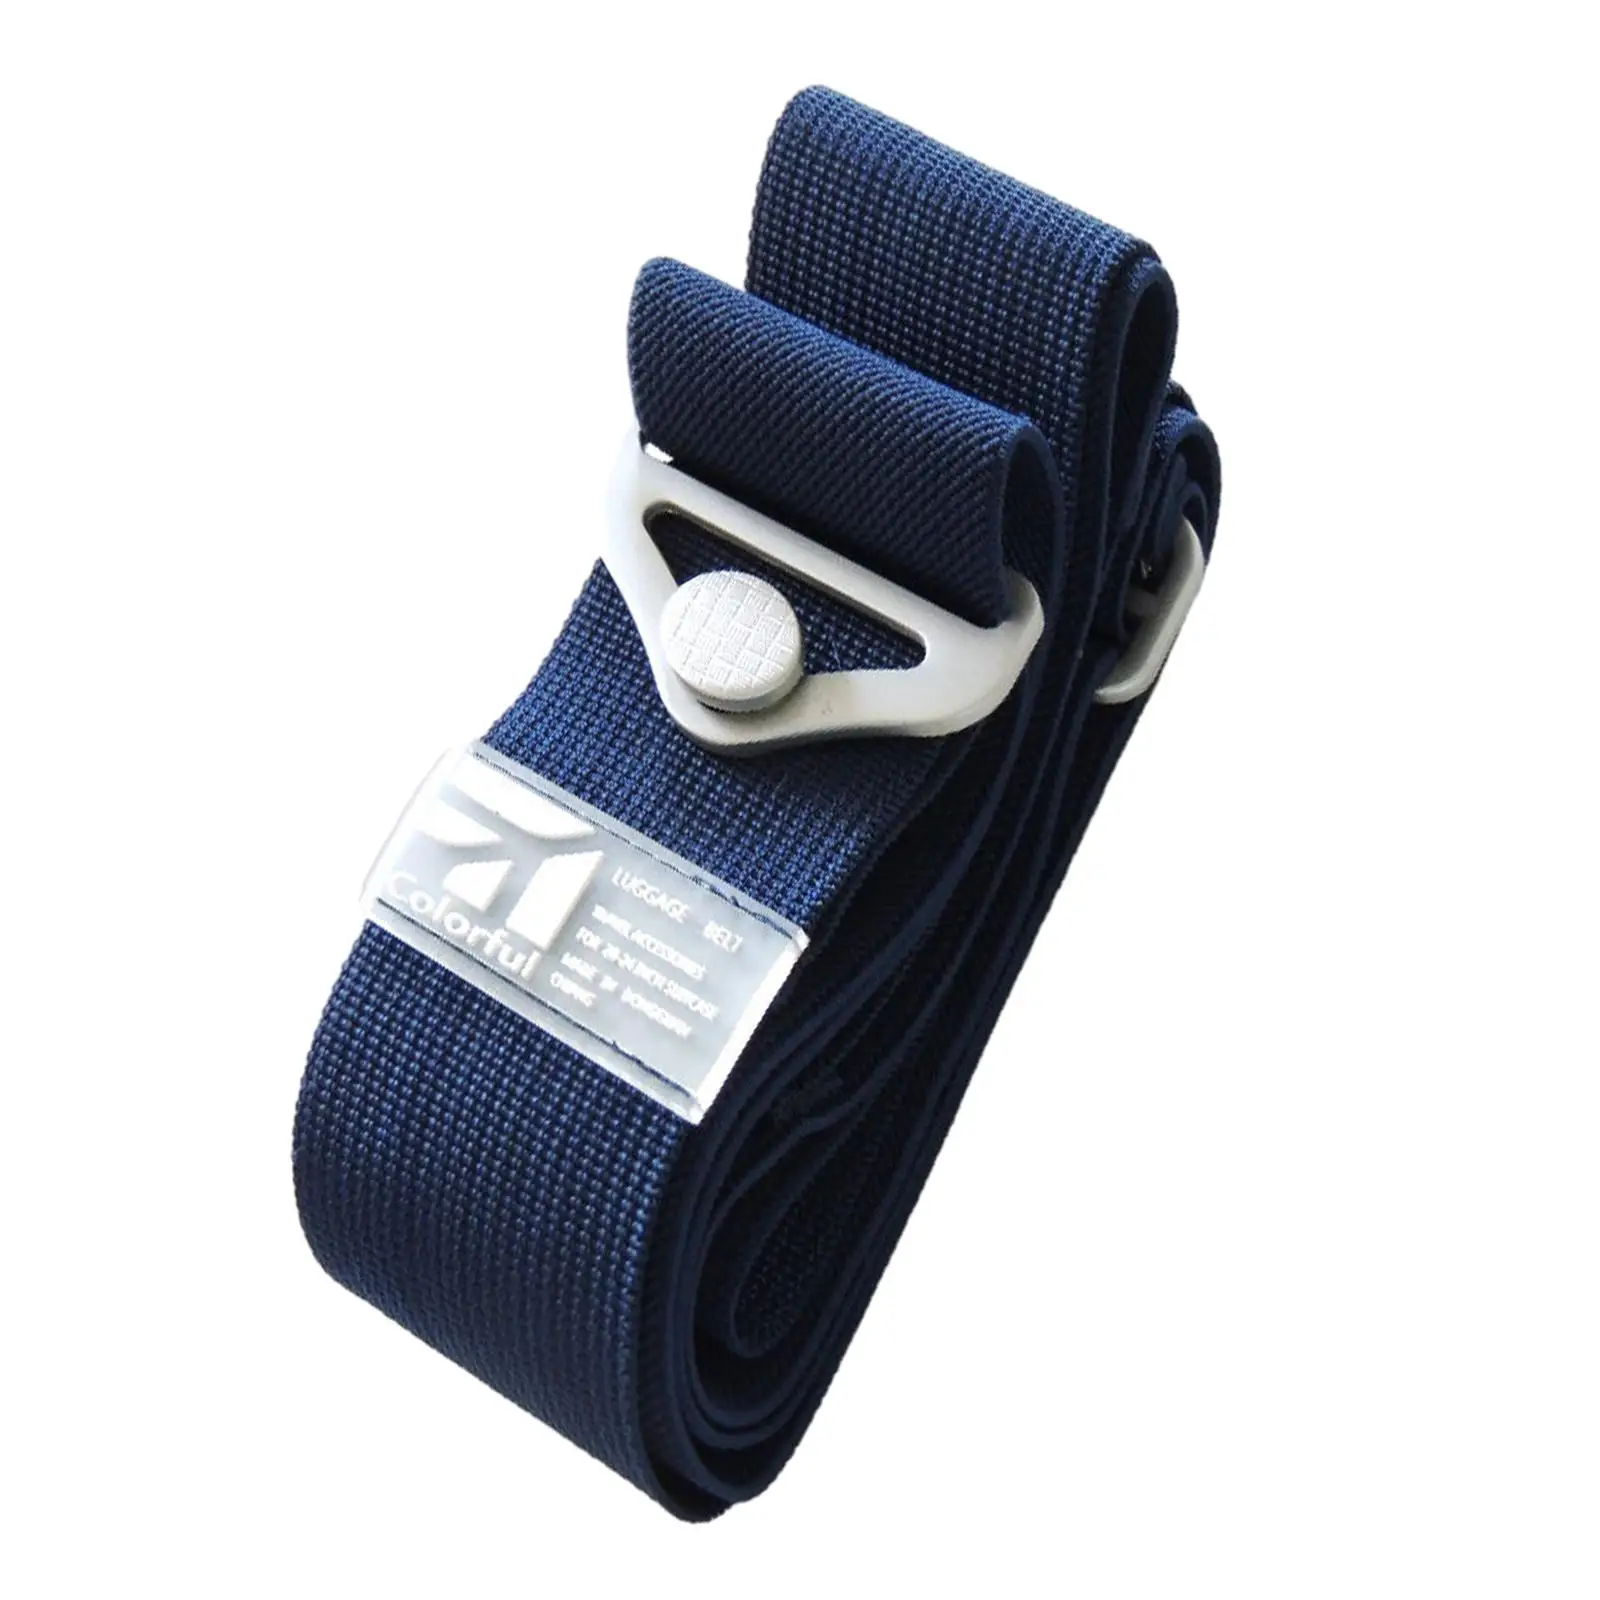 Luggage Strap Suitcases Band Travel Packing Straps for Cases Bags Suitcases